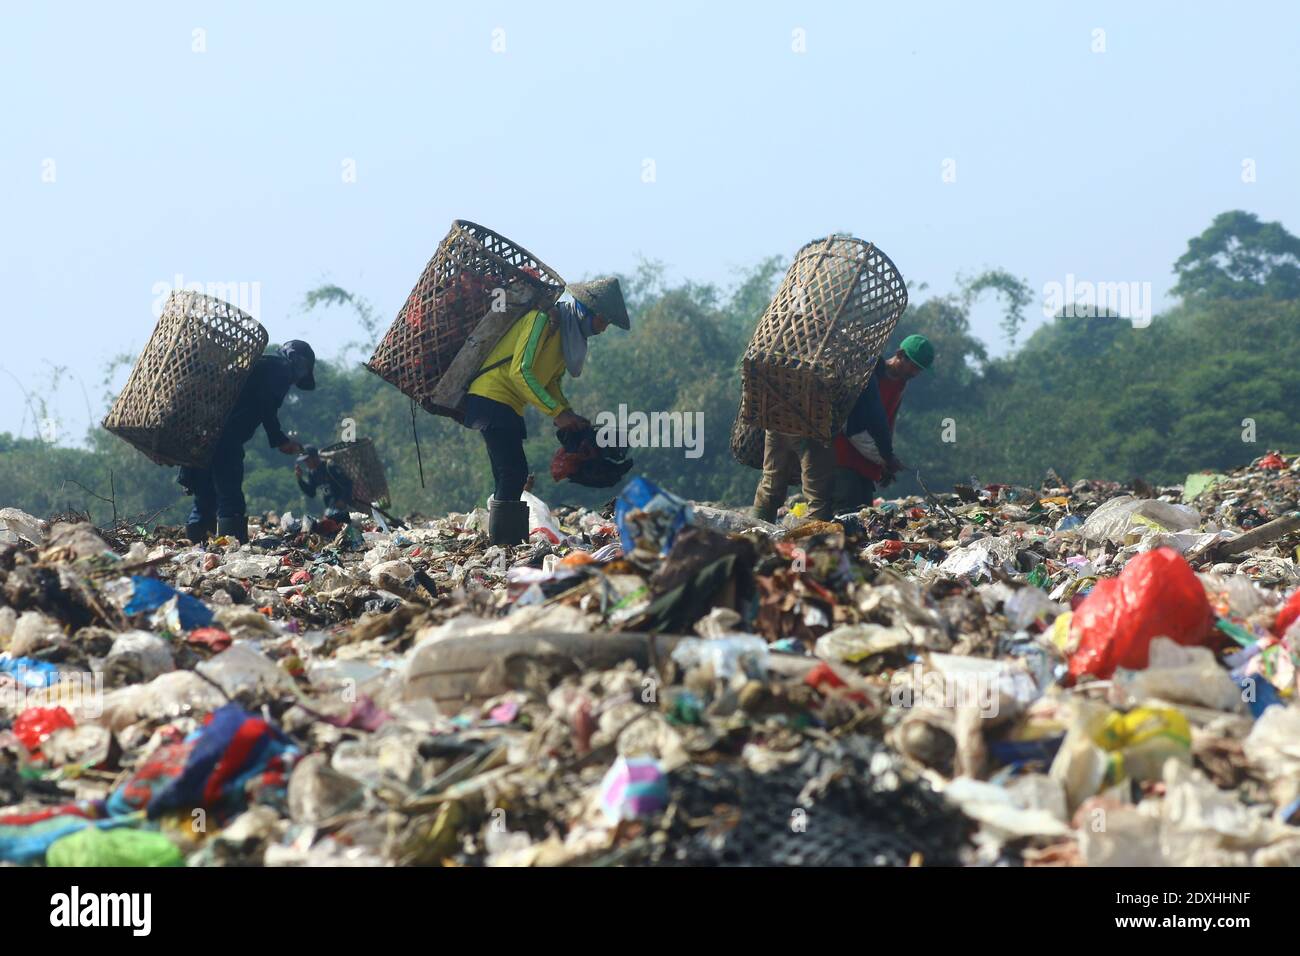 Scavengers are active in piles of rubbish in the landfill (TPA) of Galuga garbage, Cibungbulang, Bogor Regency, West Java. Stock Photo